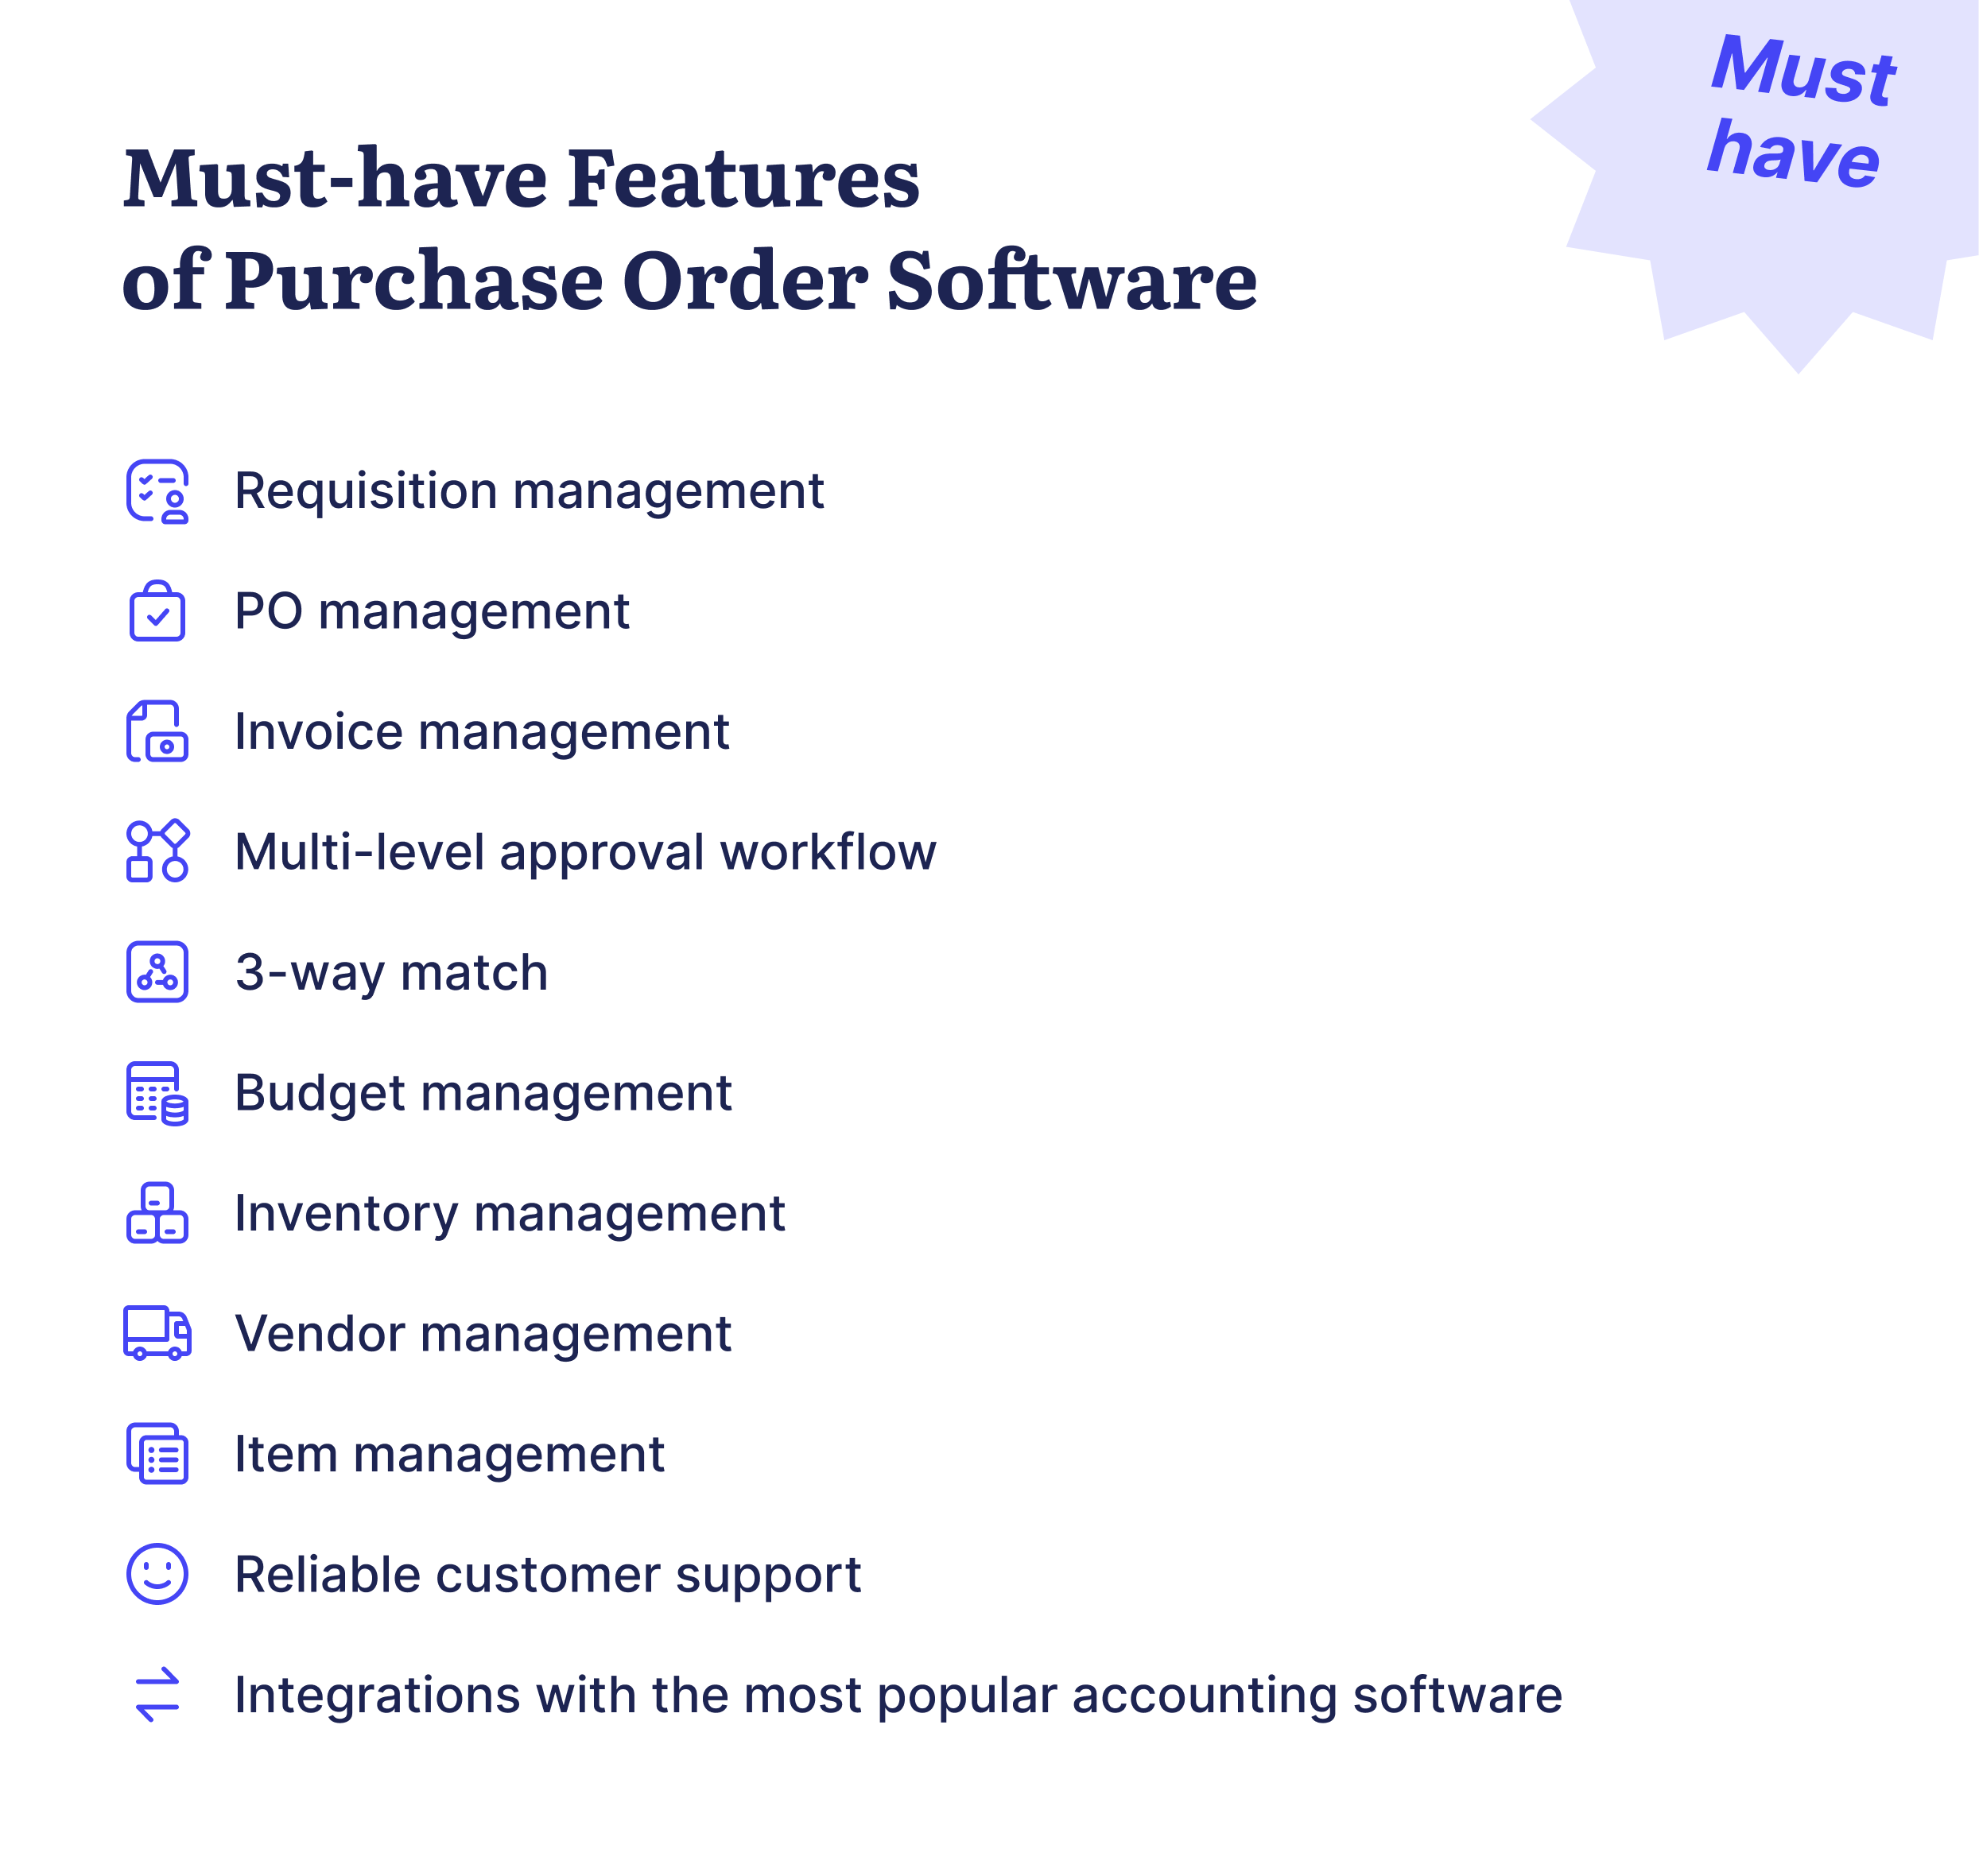 must-have features of purchase order software